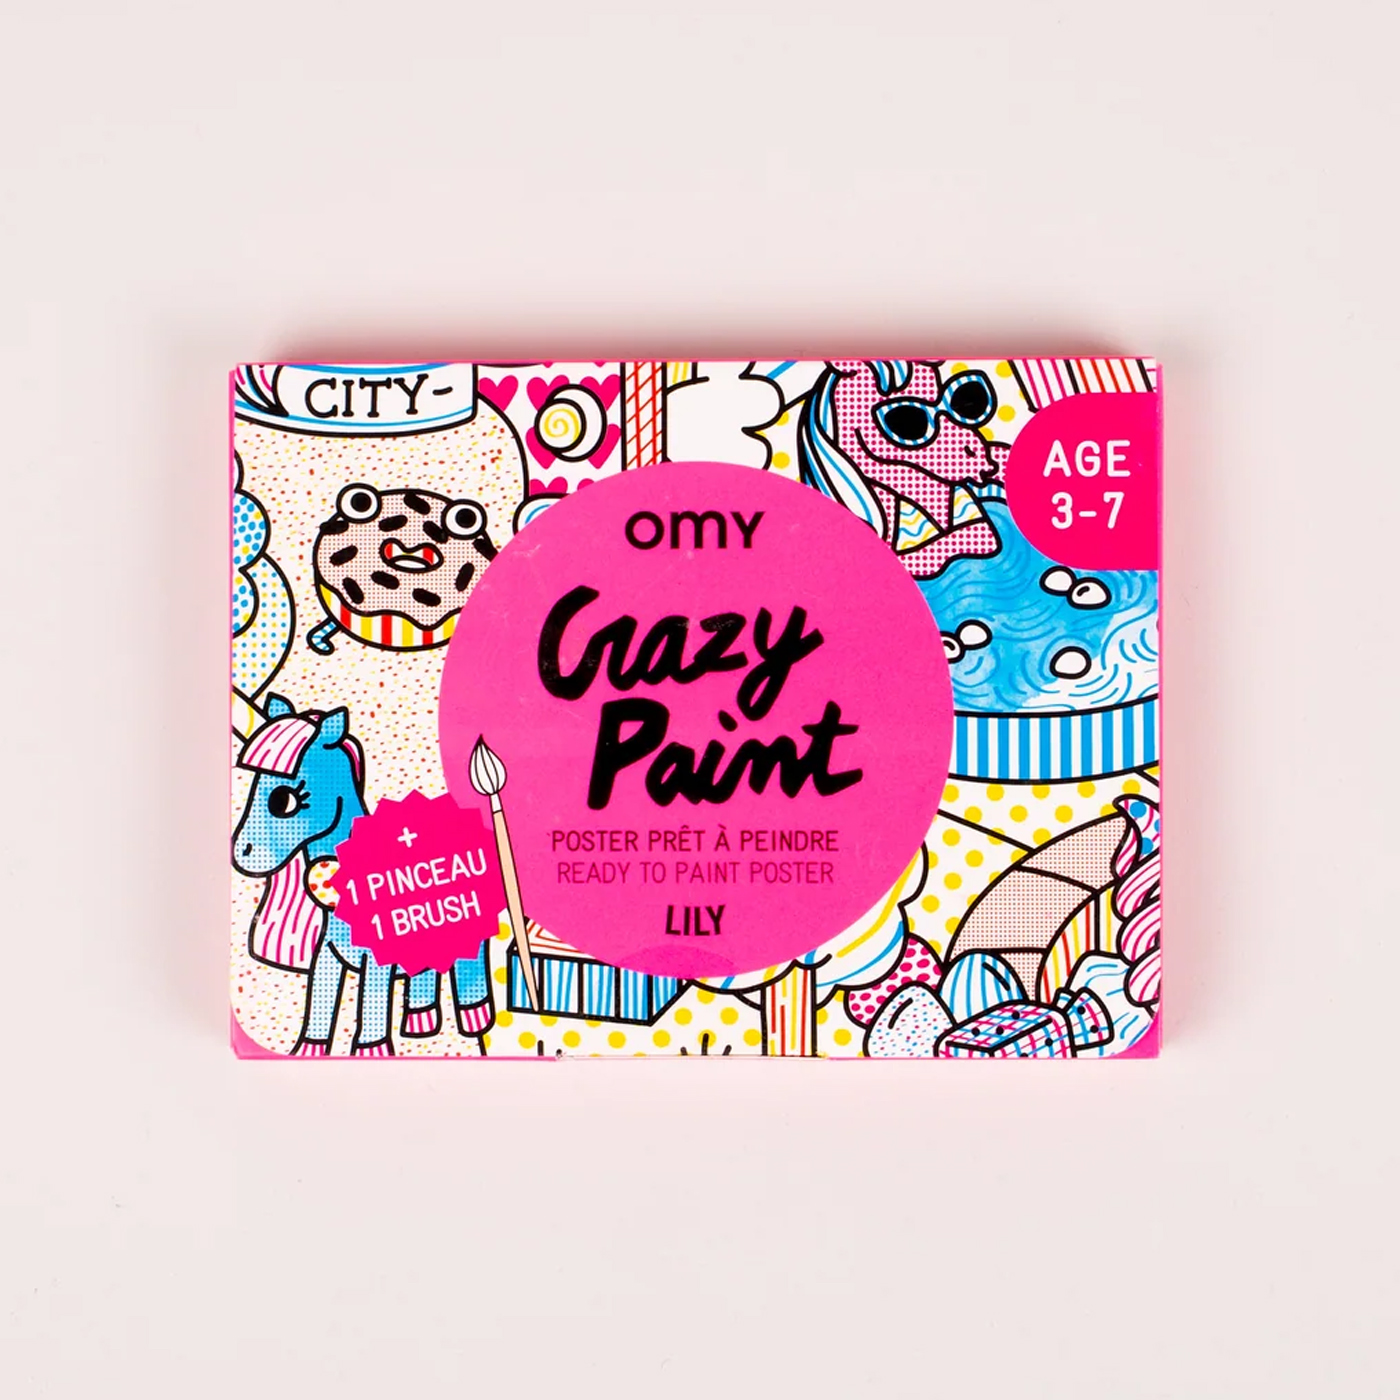  Omy Crazy Paint  | Lily